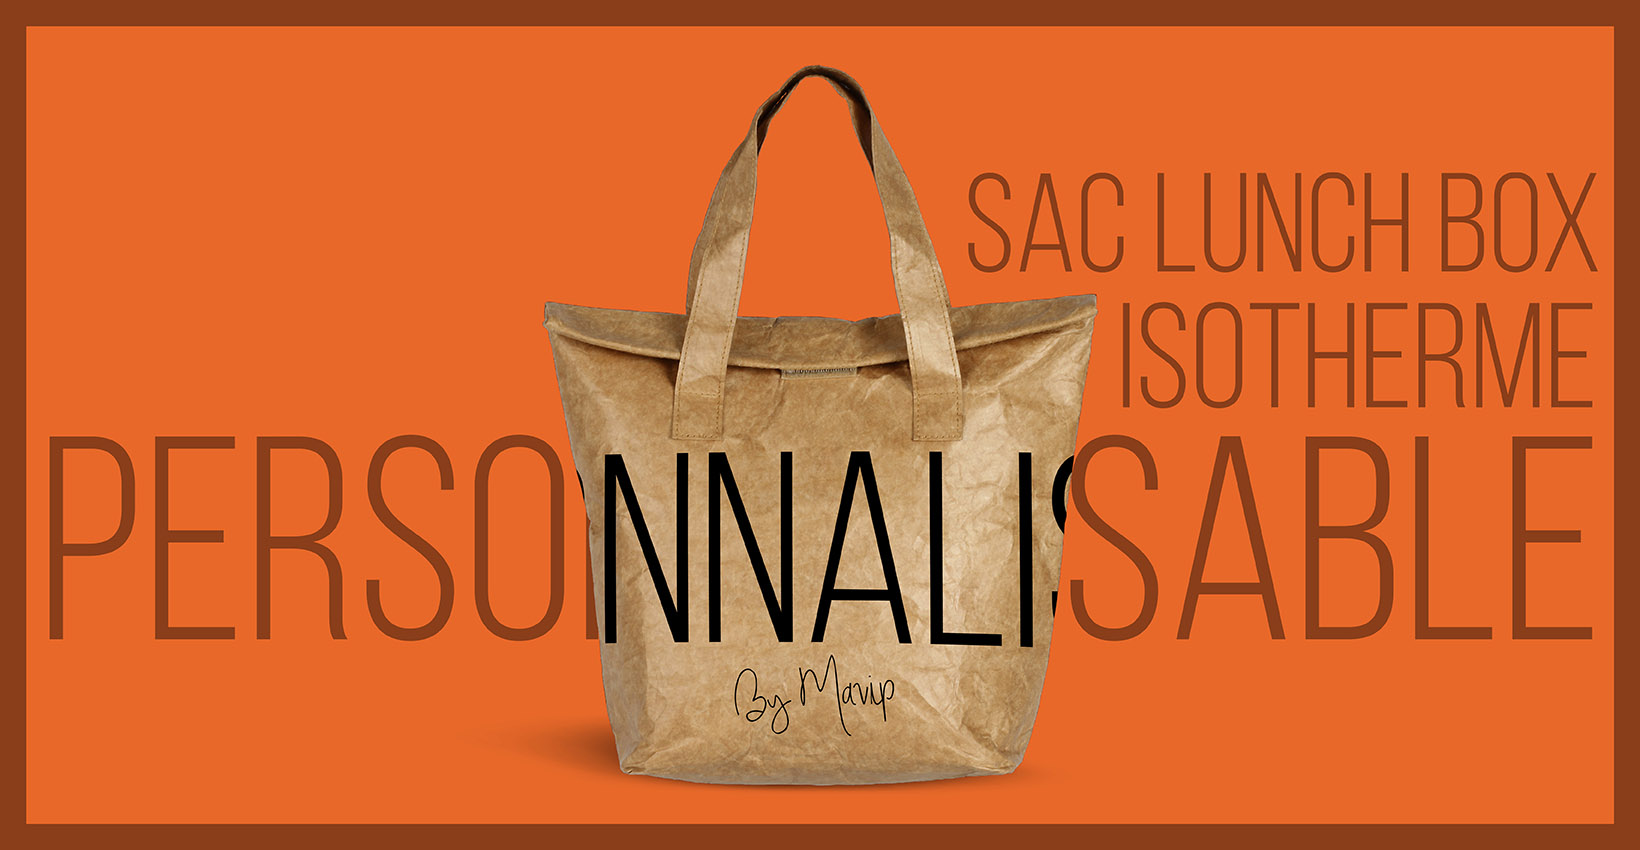 Sac lunch box isotherme personnalisable avec logo by Mavip